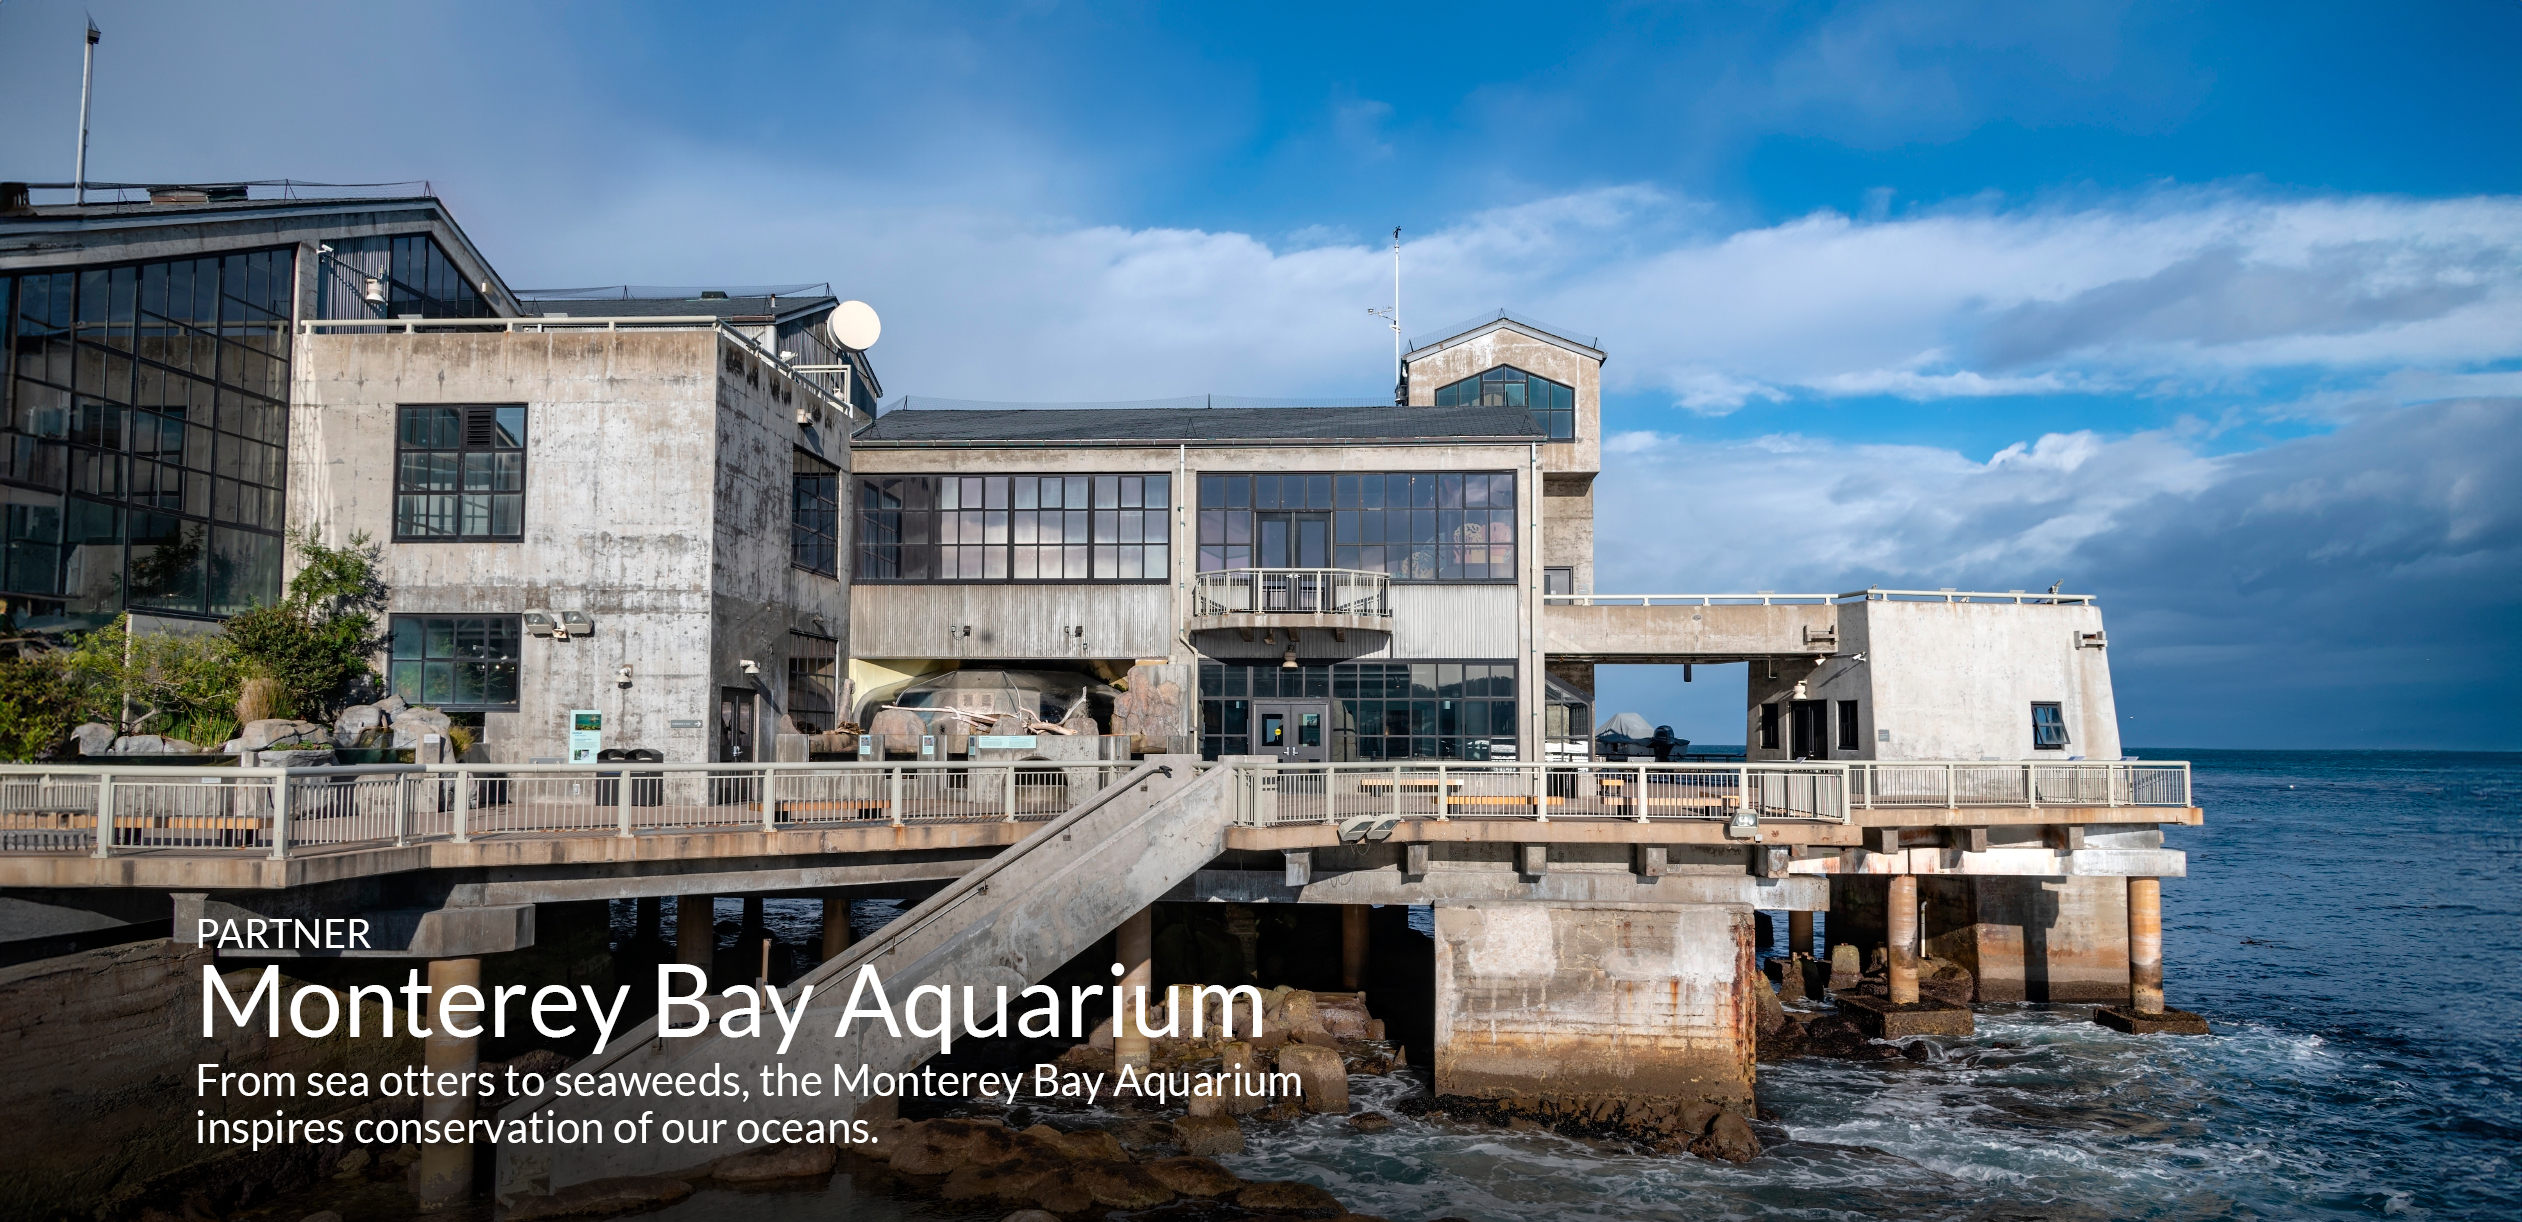 PARTNER Monterey Bay Aquarium From sea otters to seaweeds, the Monterey Bay Aquarium inspires conservation of our oceans.